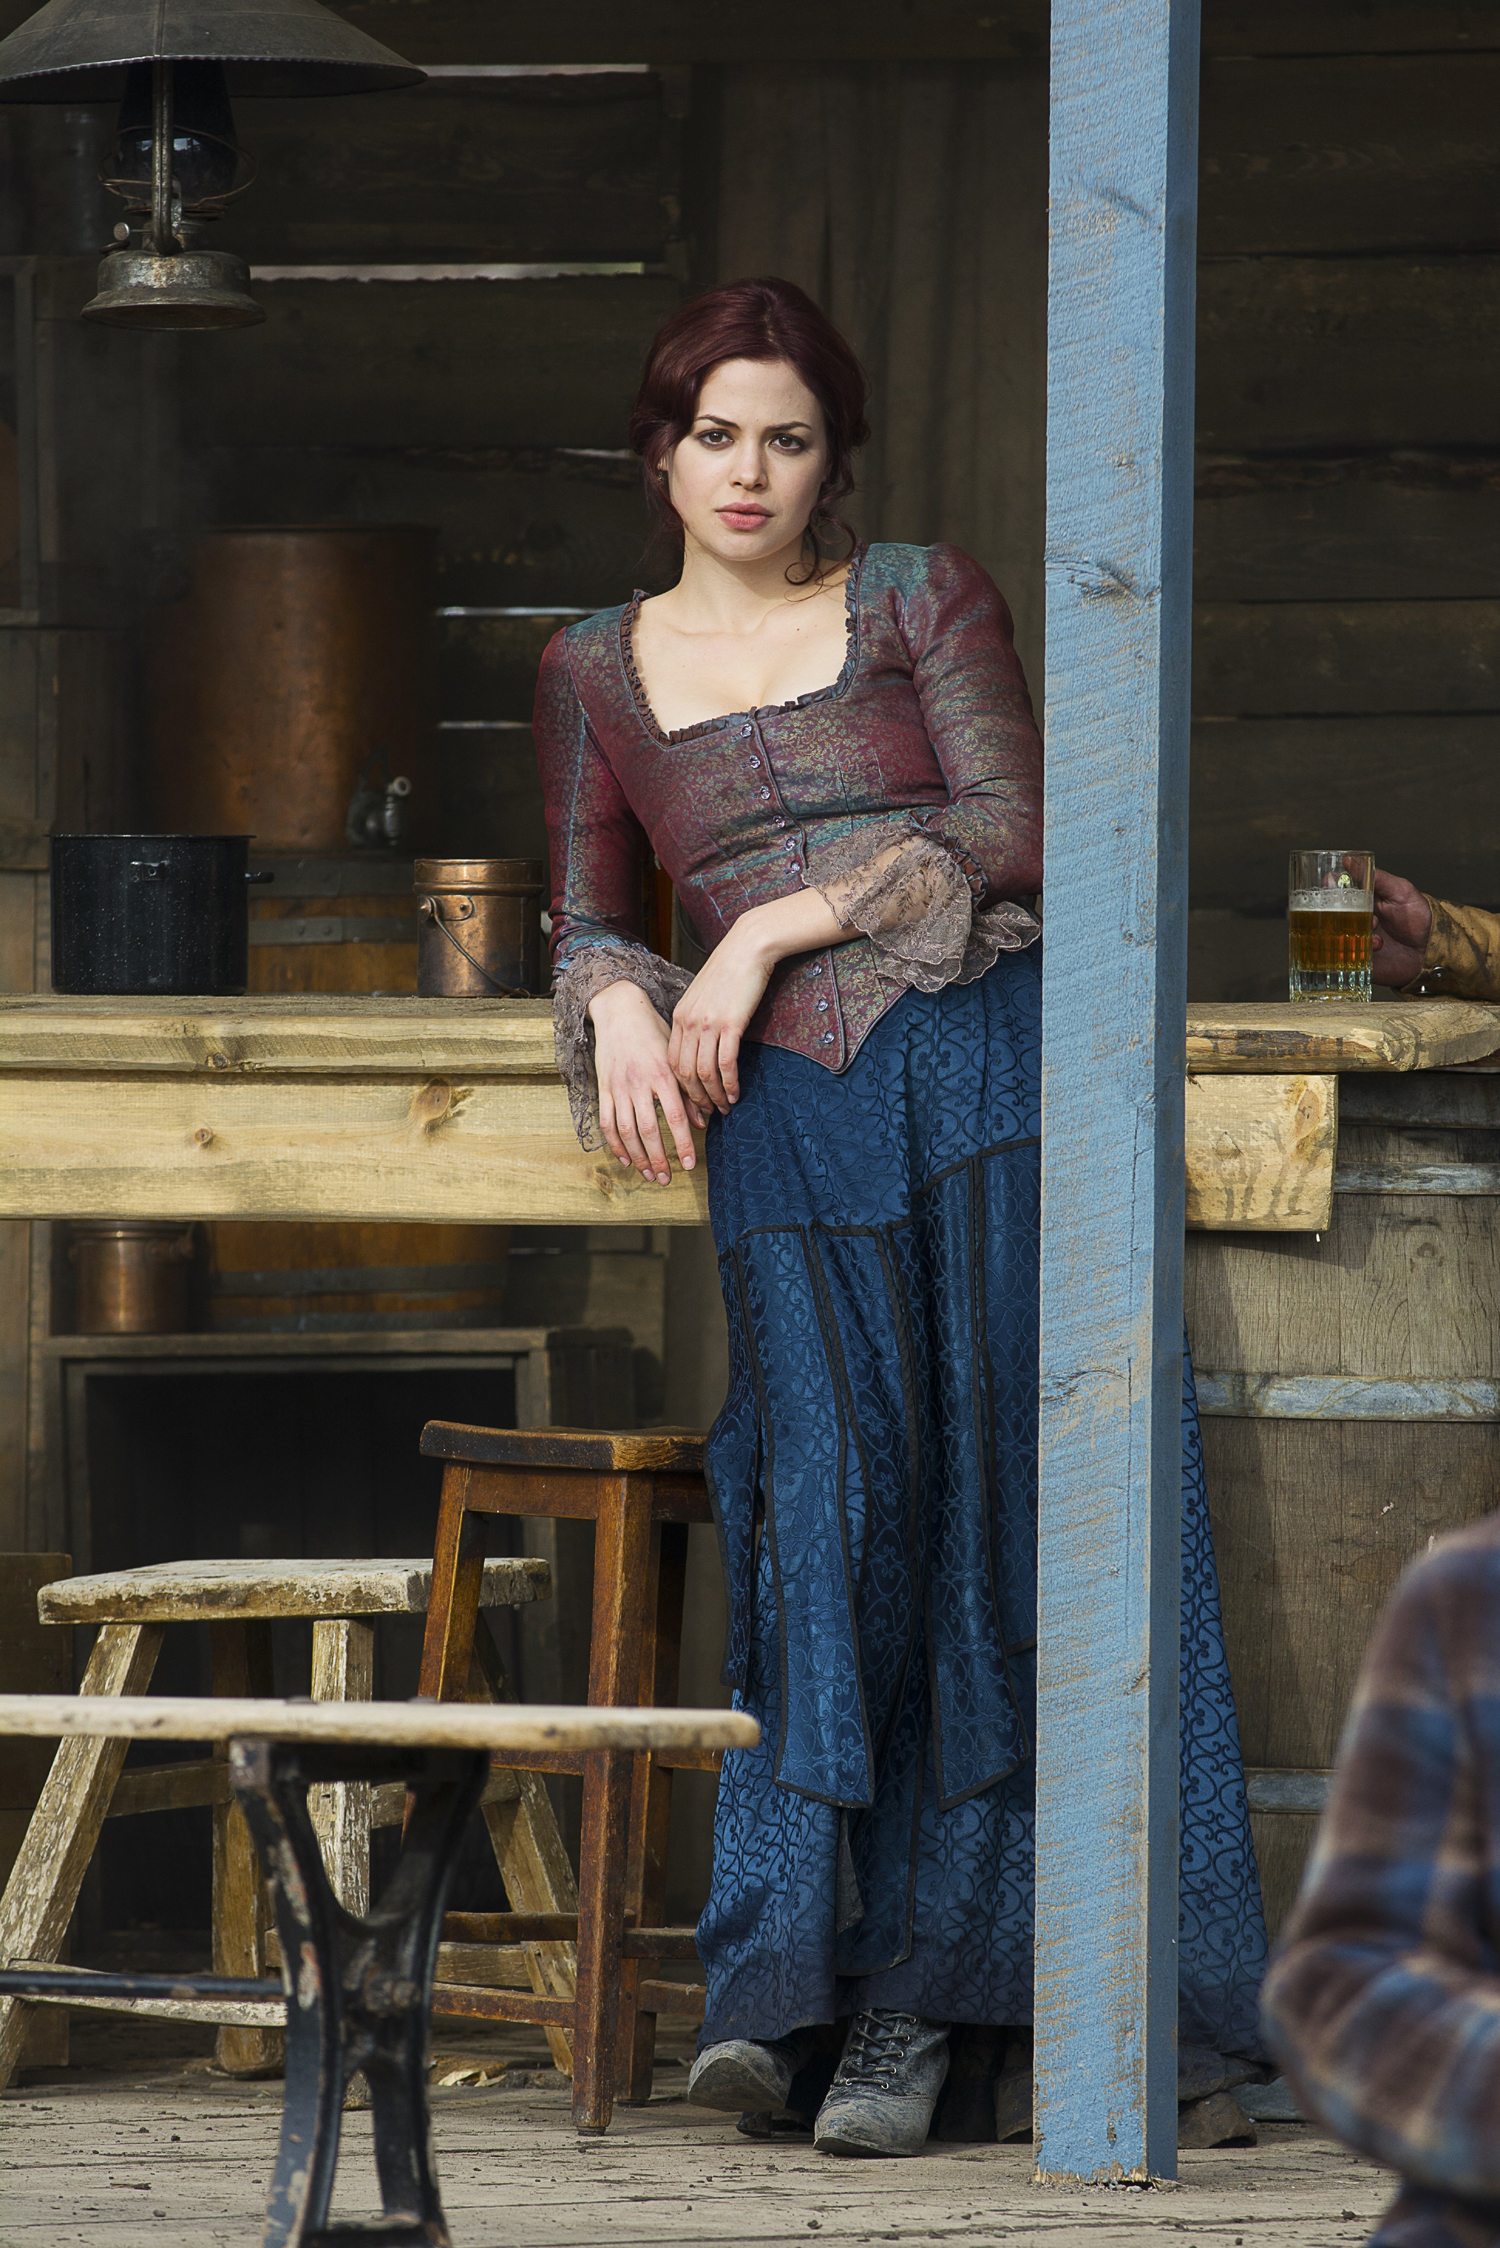 Klondike Image Conor Leslie As Sabine HD Wallpaper And Background